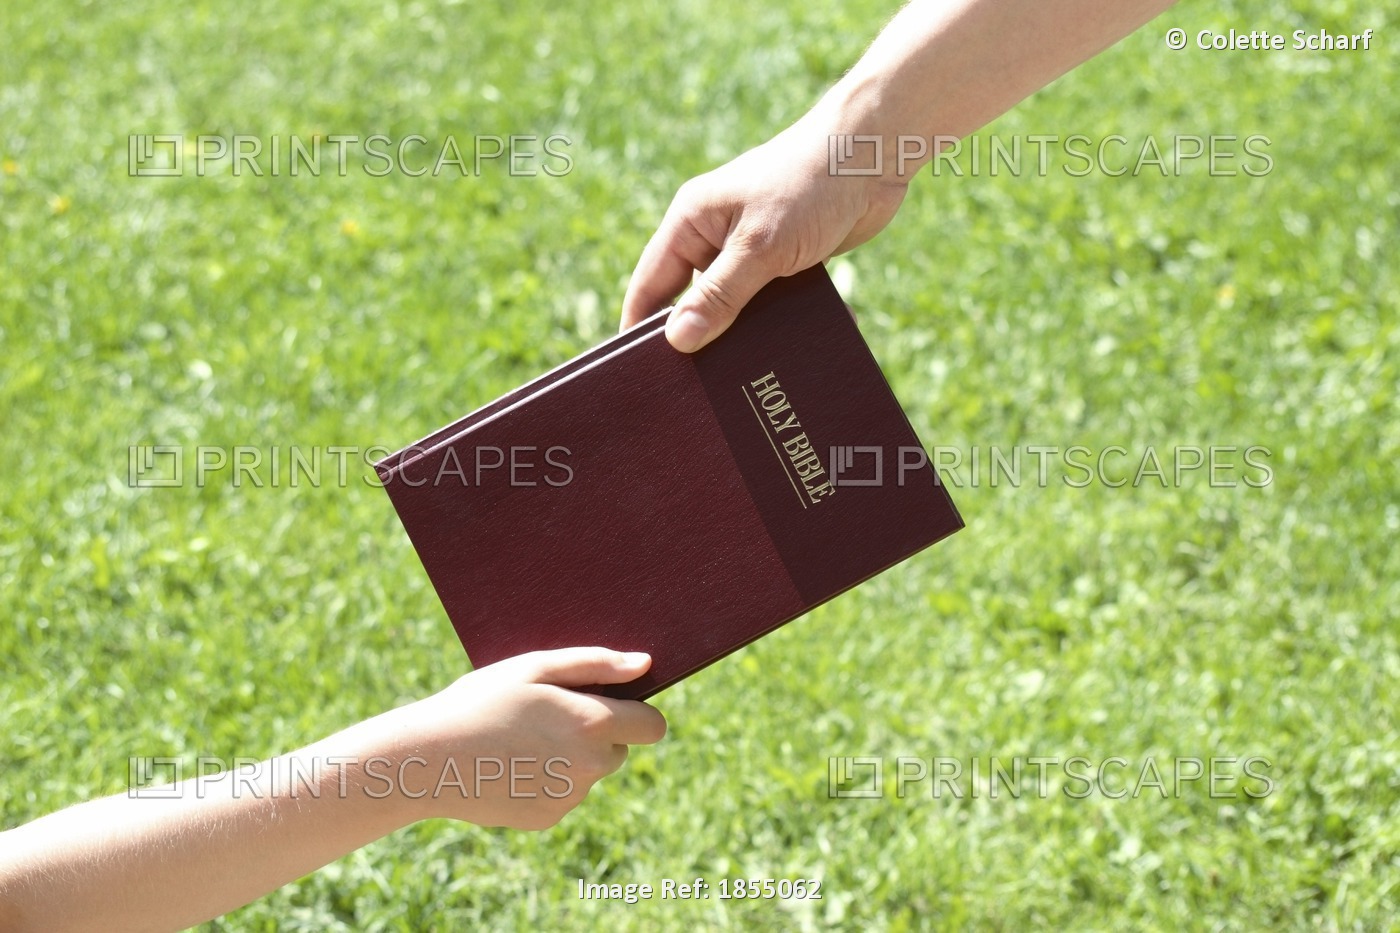 Sharing The Bible